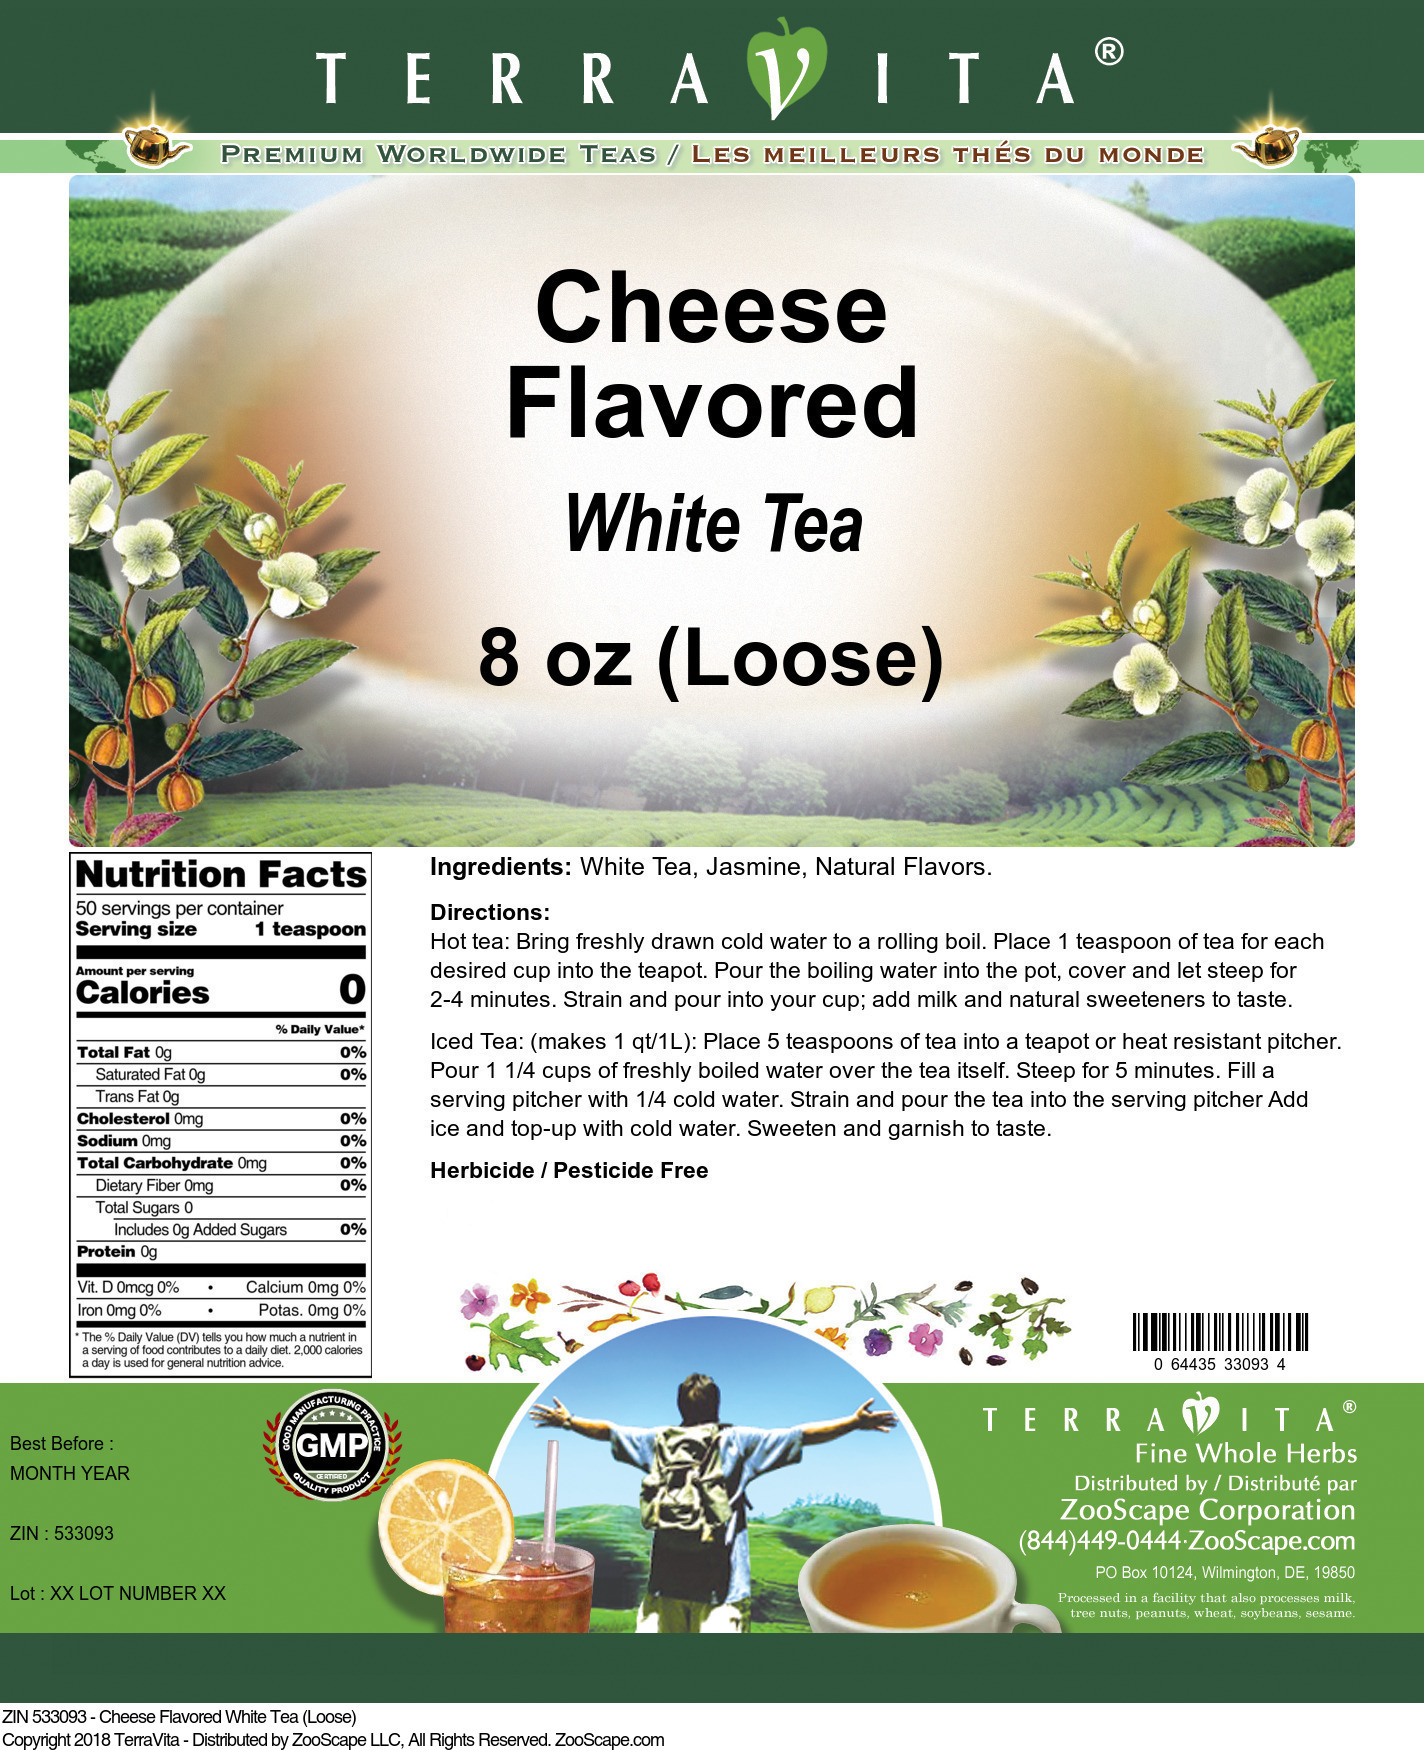 Cheese Flavored White Tea (Loose) - Label